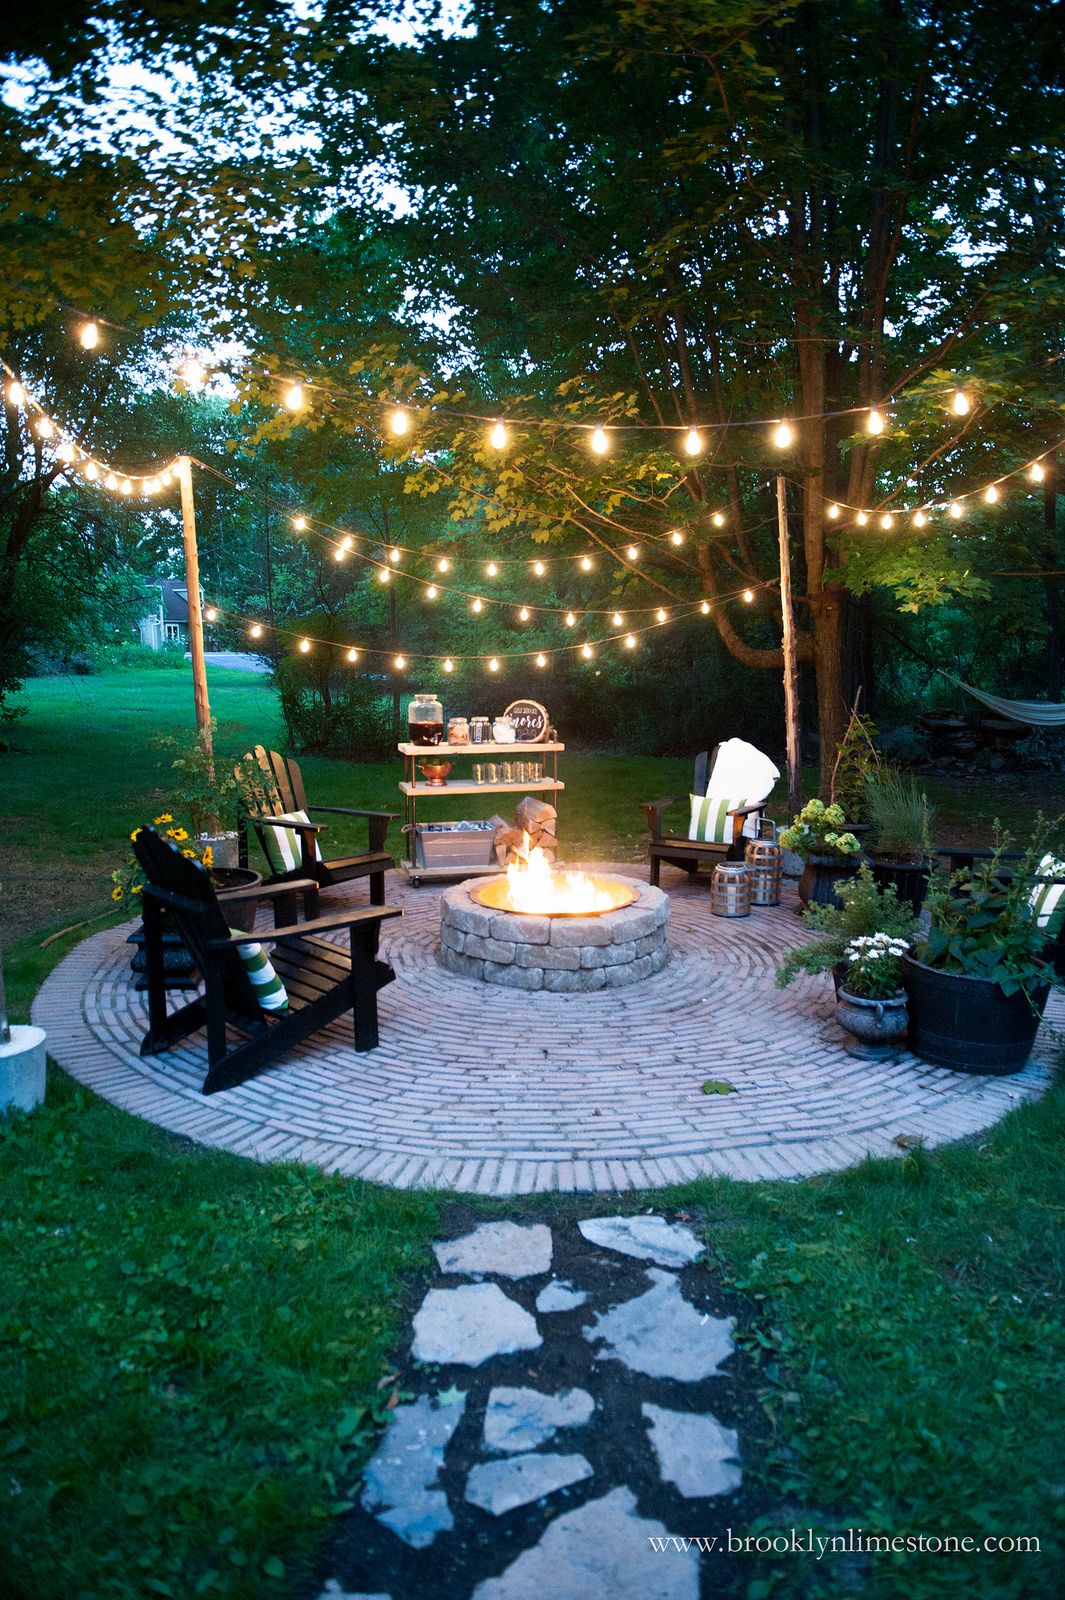 How To Hang Outdoor String Lights, How To Setup A Fire Pit